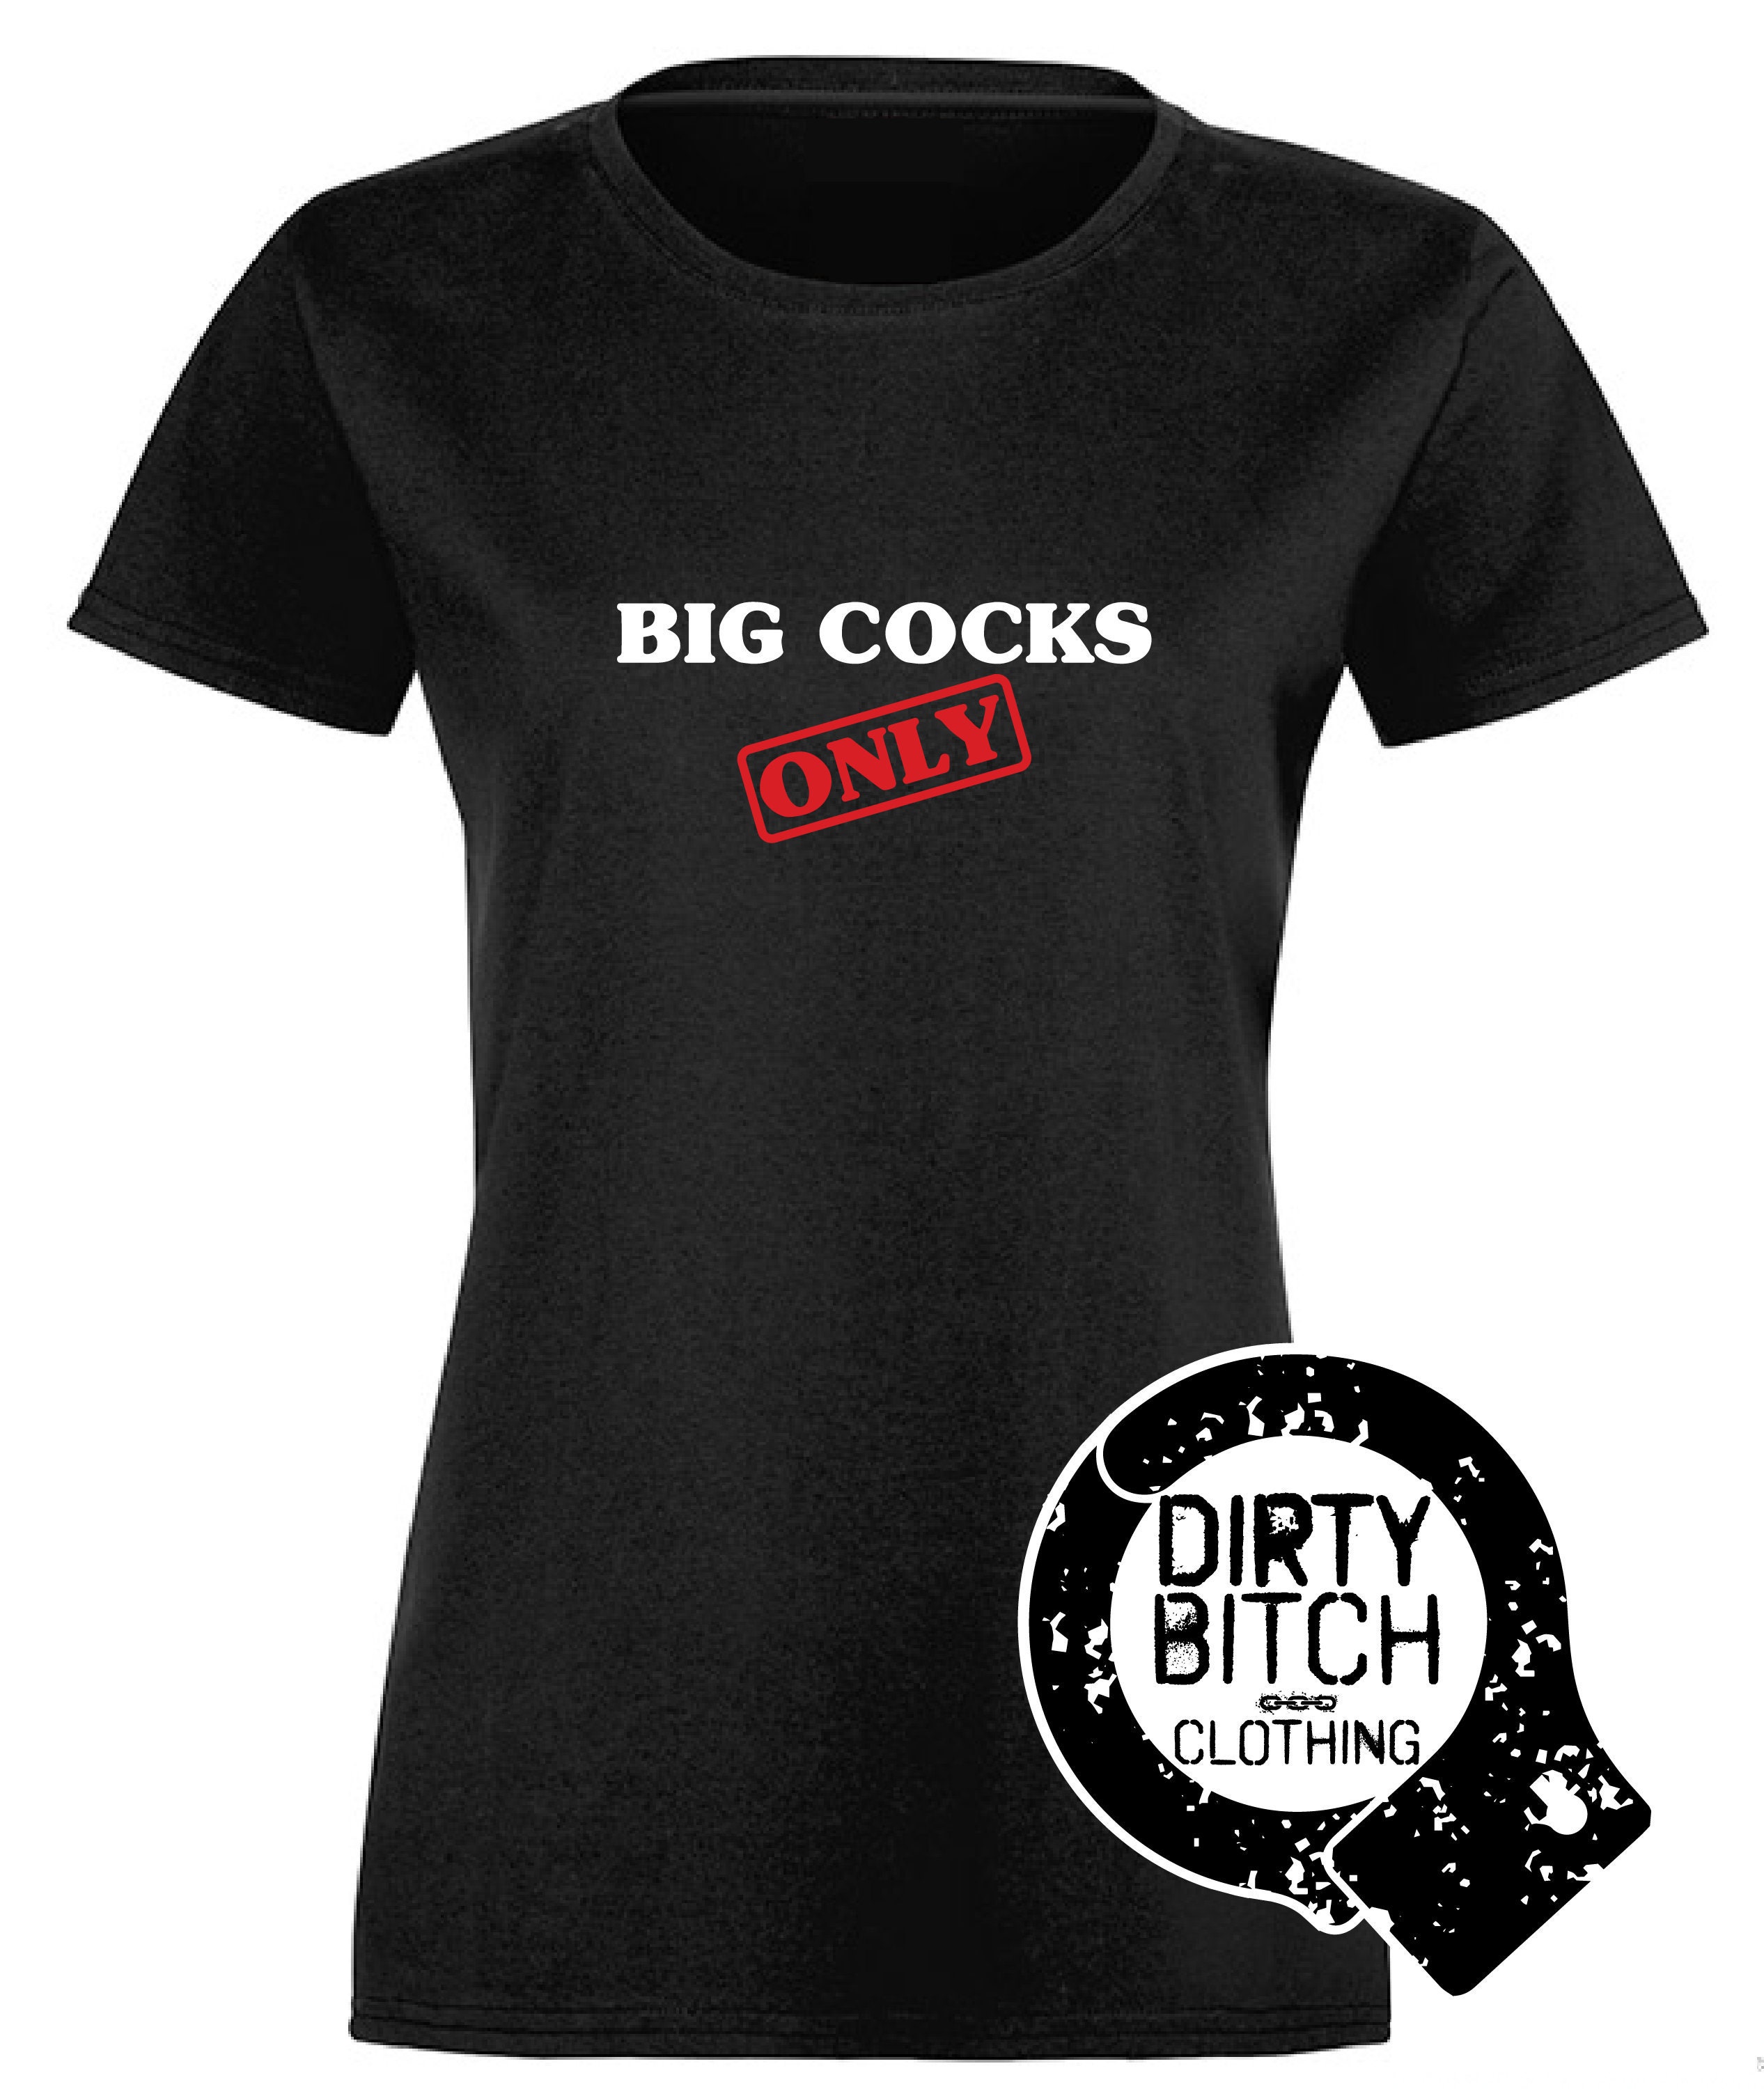 Big Cocks Only Adult T-shirt Clothing Boobs Hotwife picture photo